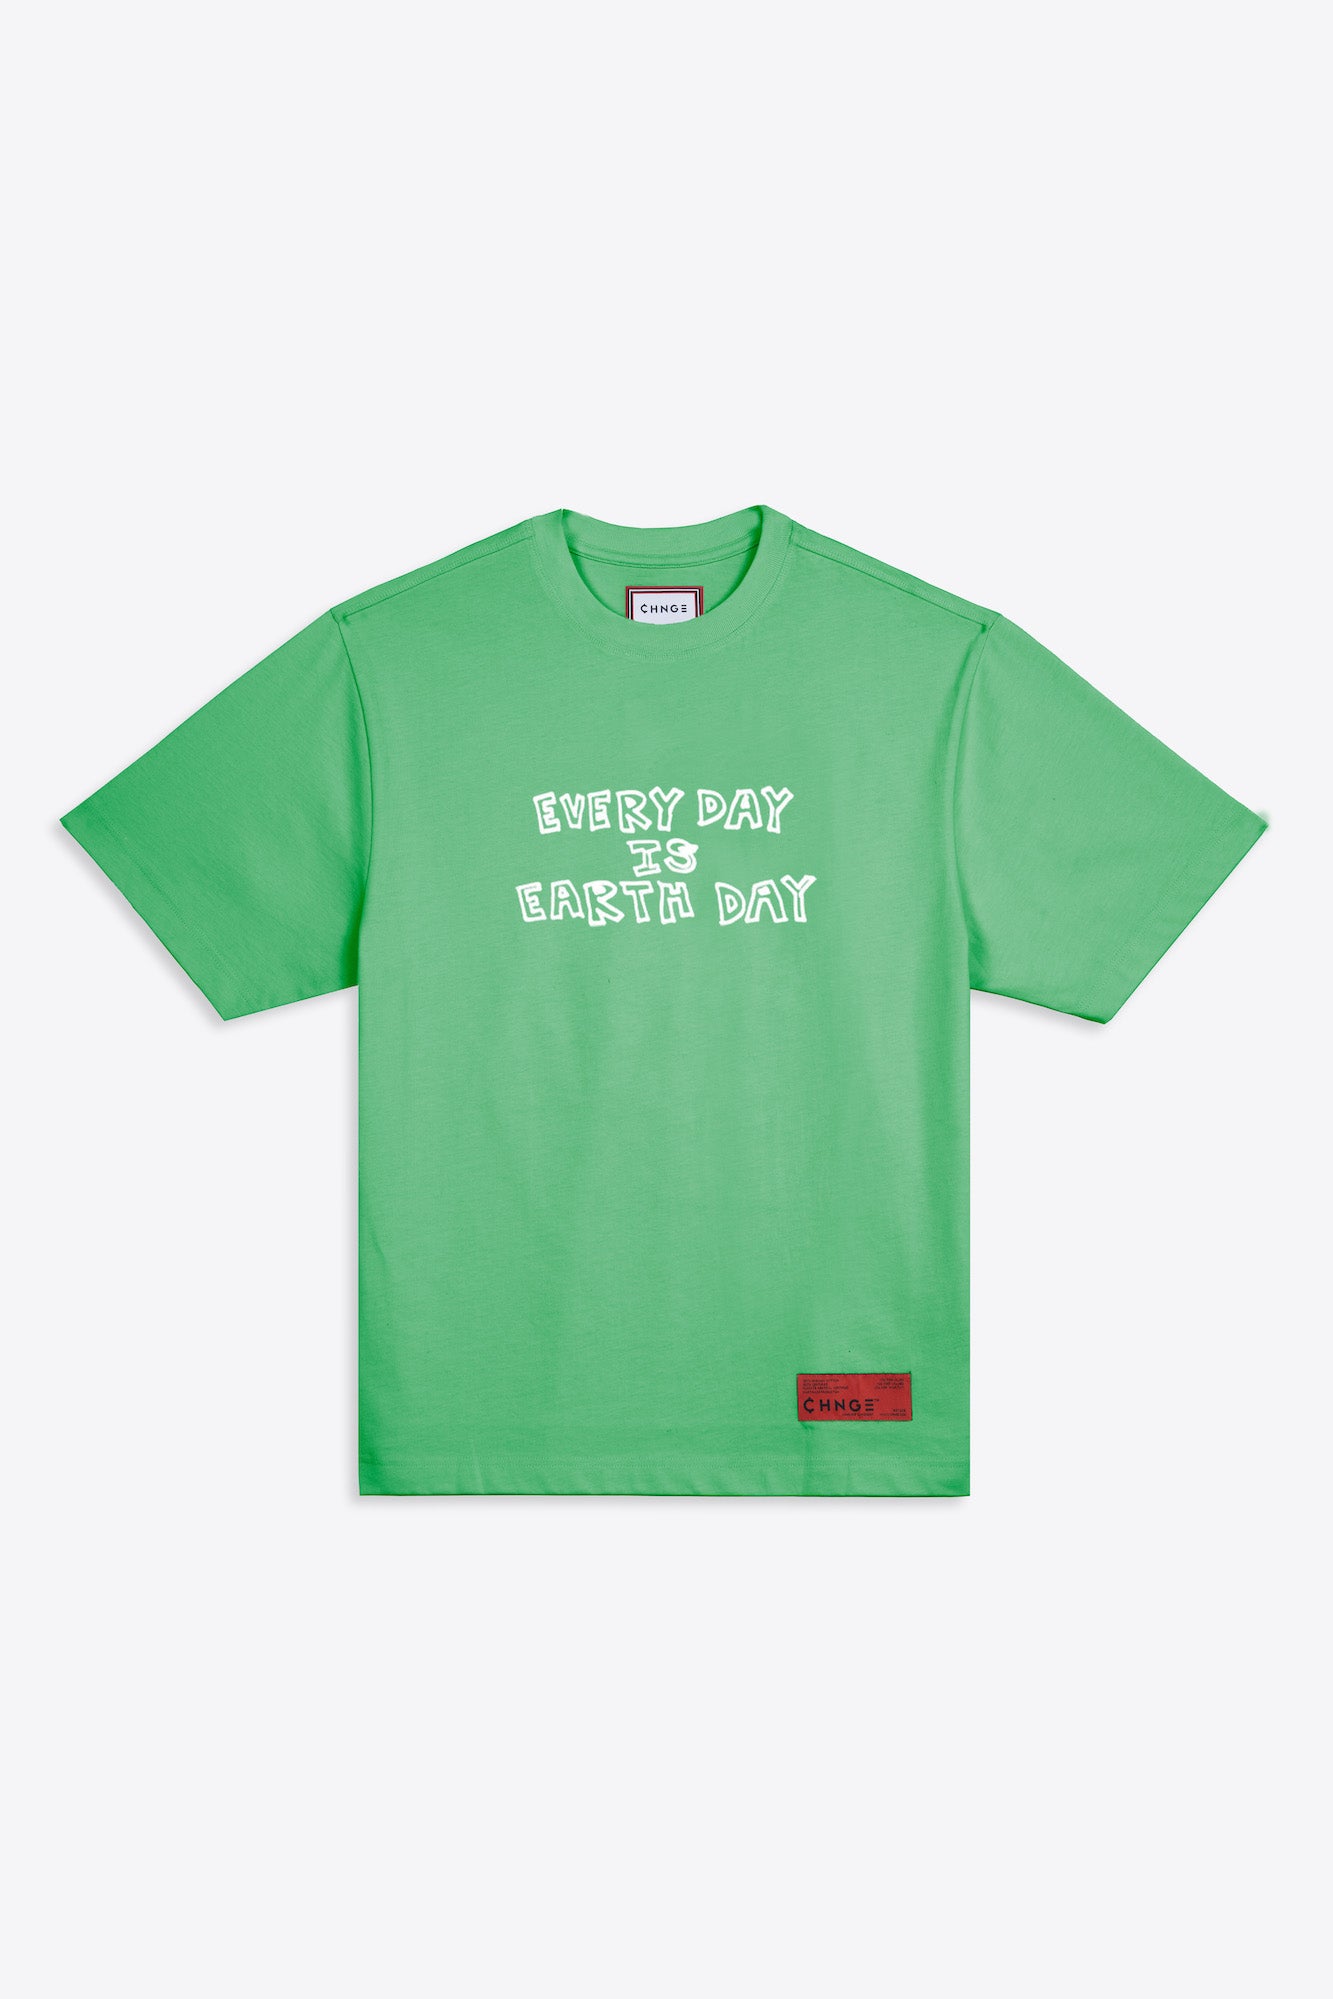 Every Day Earth Day S/S $42 T-Shirt (Kelly Green)